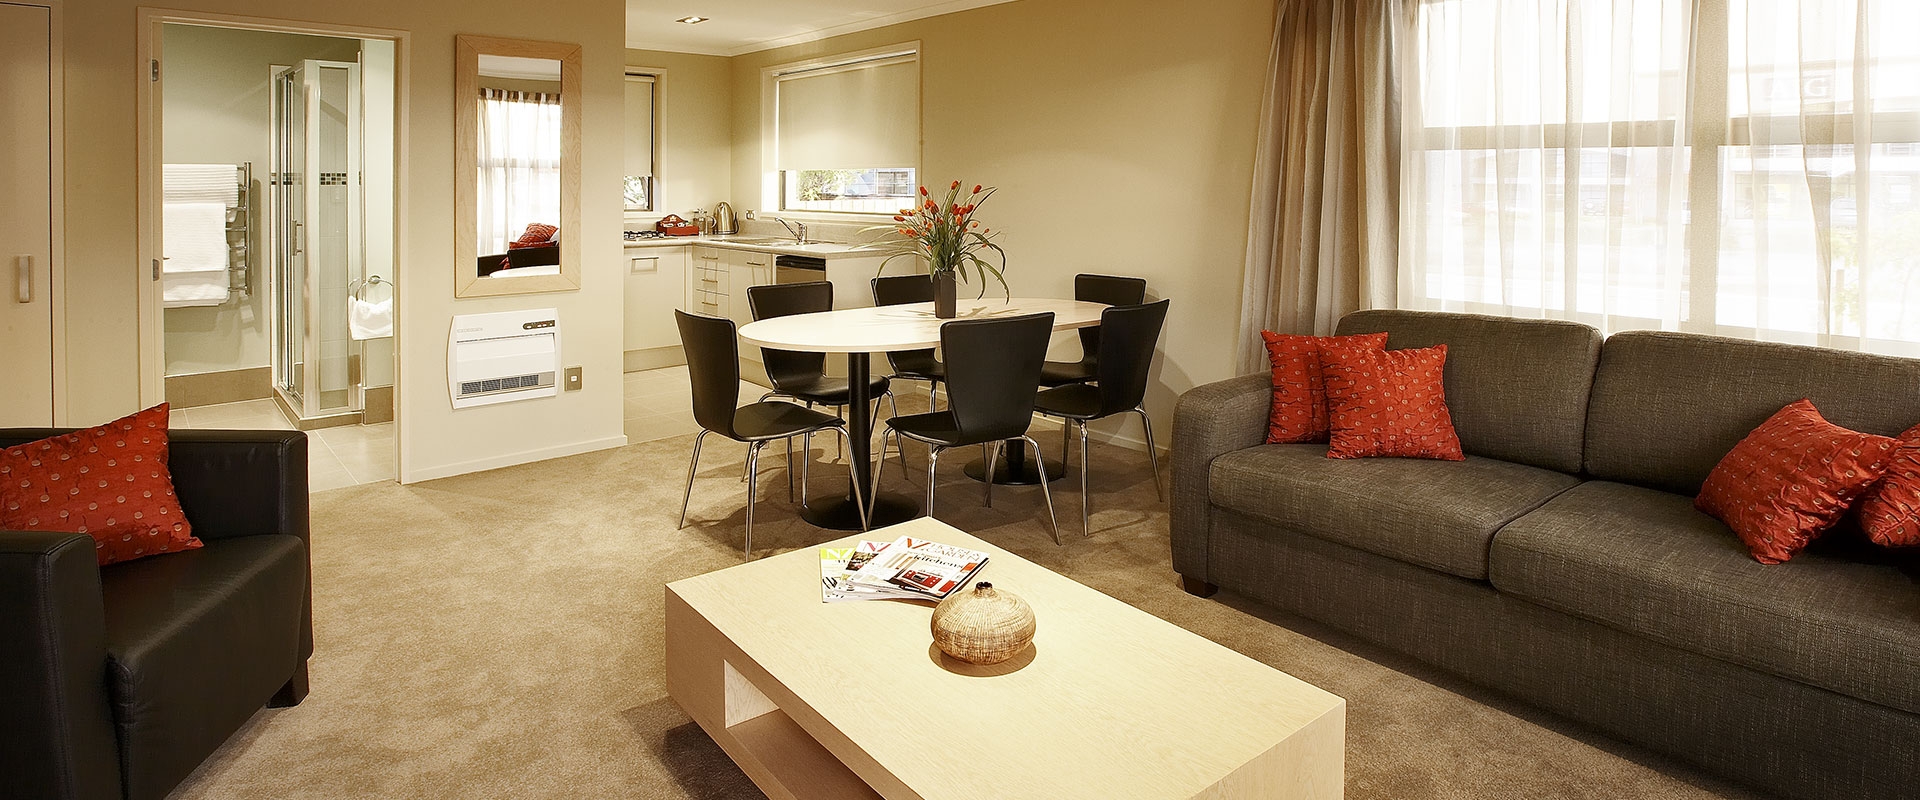 fully furnished modern accommodation in Christchurch